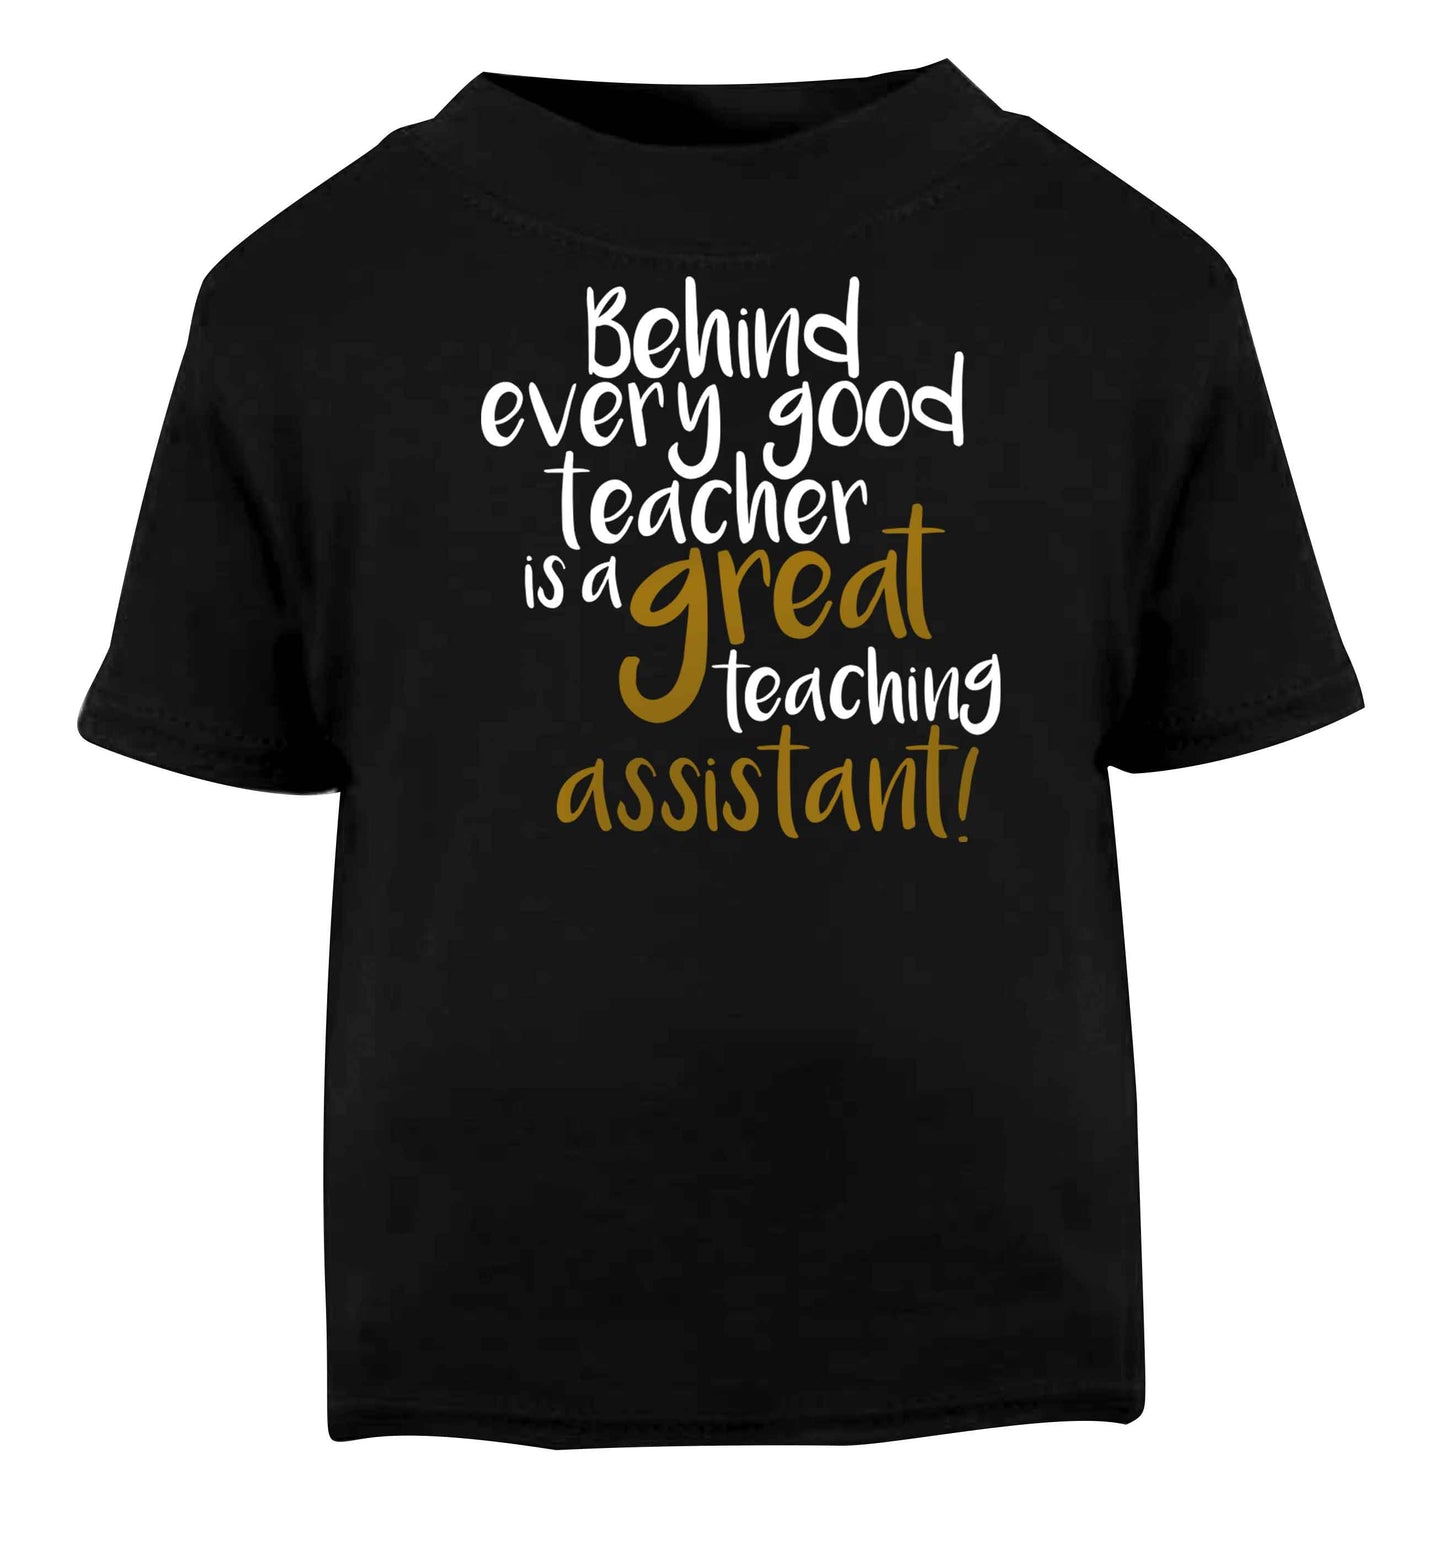 Behind every good teacher is a great teaching assistant Black baby toddler Tshirt 2 years